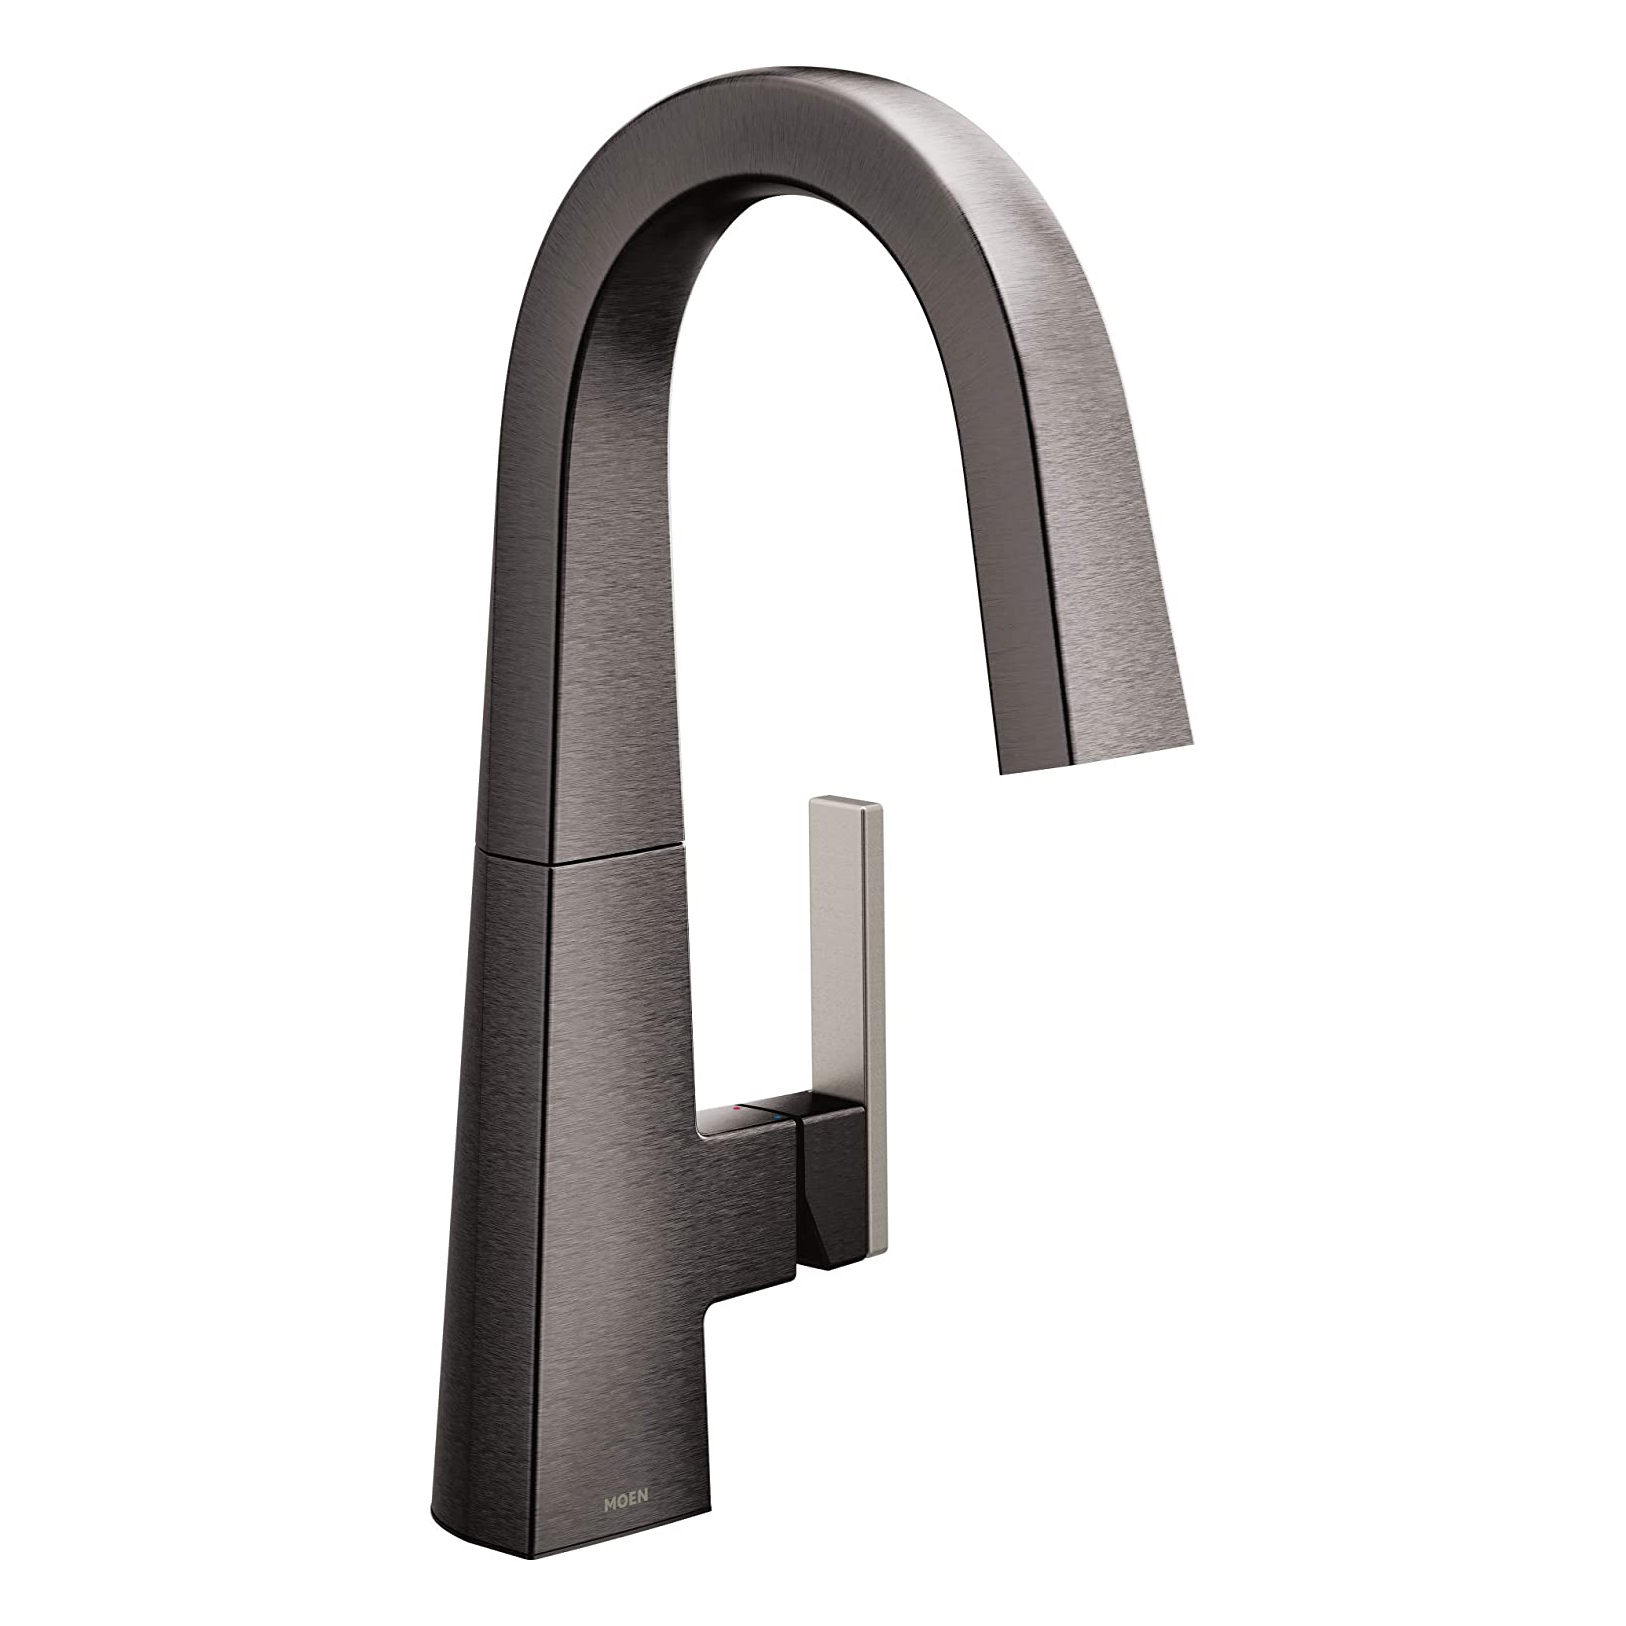 Nio Single Hole High Arc Lav Faucet in Black Stainless